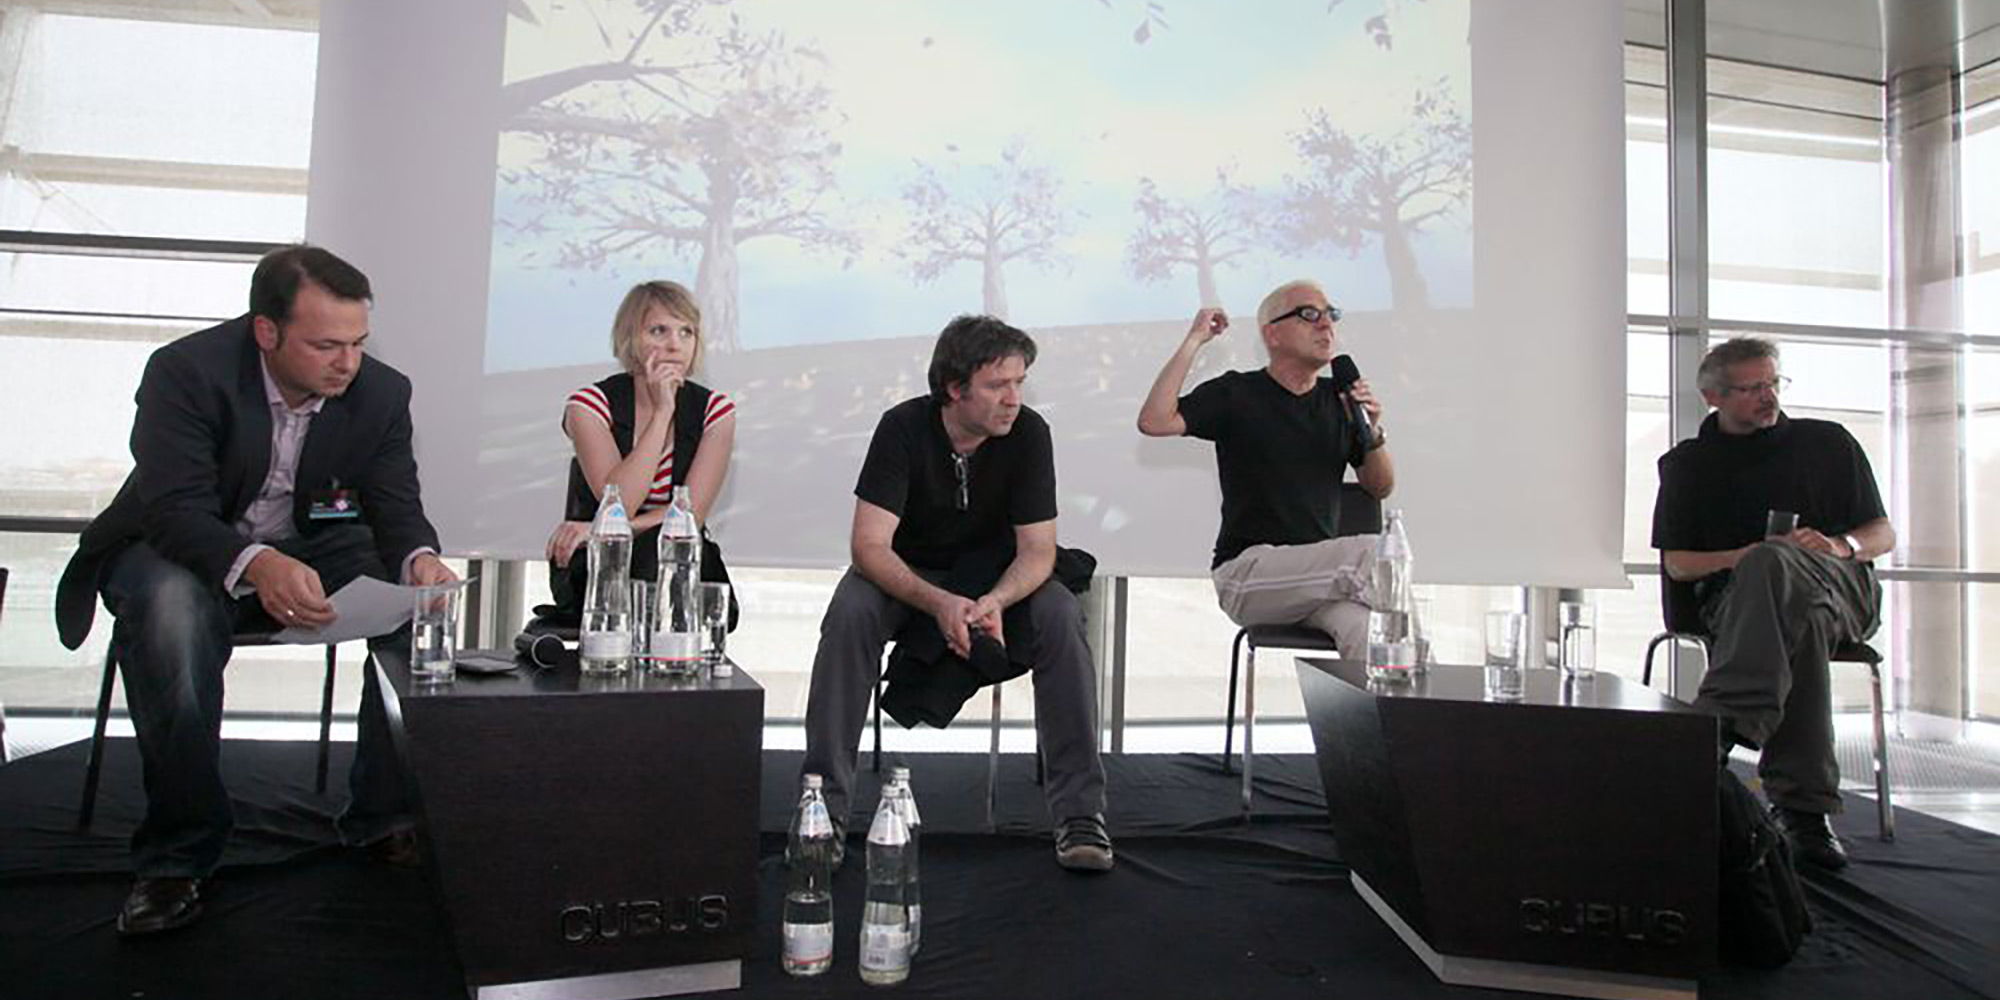 Pixelspaces 2011 – Re-Scripting the Stage: Roland Haring (AT), Martina Mara (AT), Louis-Philippe Demers (CA/SG), Klaus Obermaier (AT) and Johannes Birringer (US/UK) (from left to right).